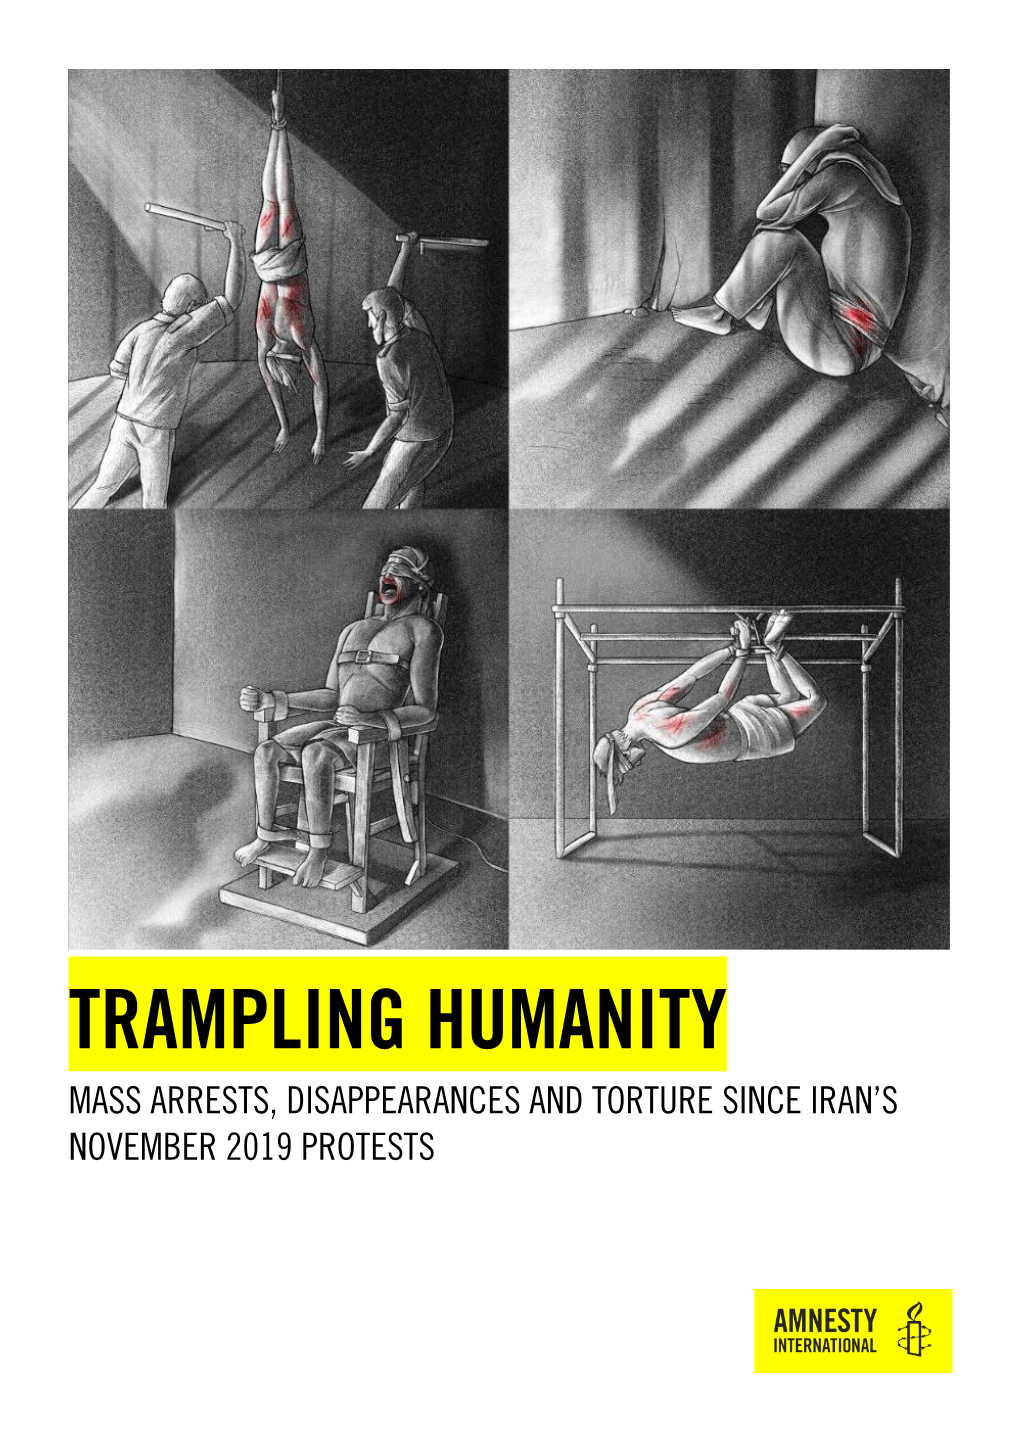 Trampling Humanity Mass Arrests, Disappearances and Torture Since Iran’S November 2019 Protests